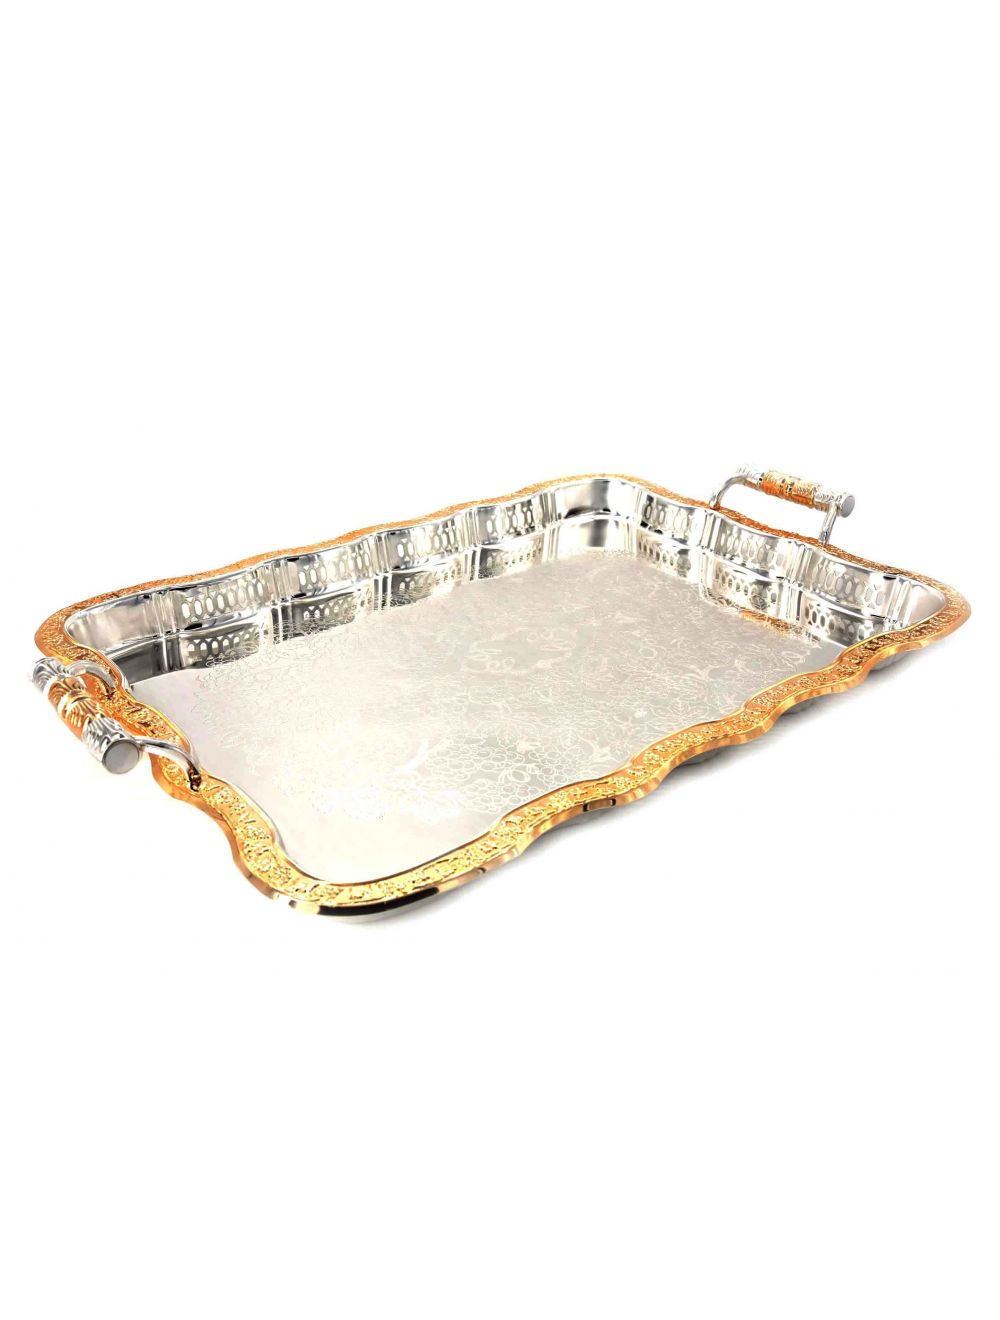 Serving Tray Acrylic Silver and Gold Design